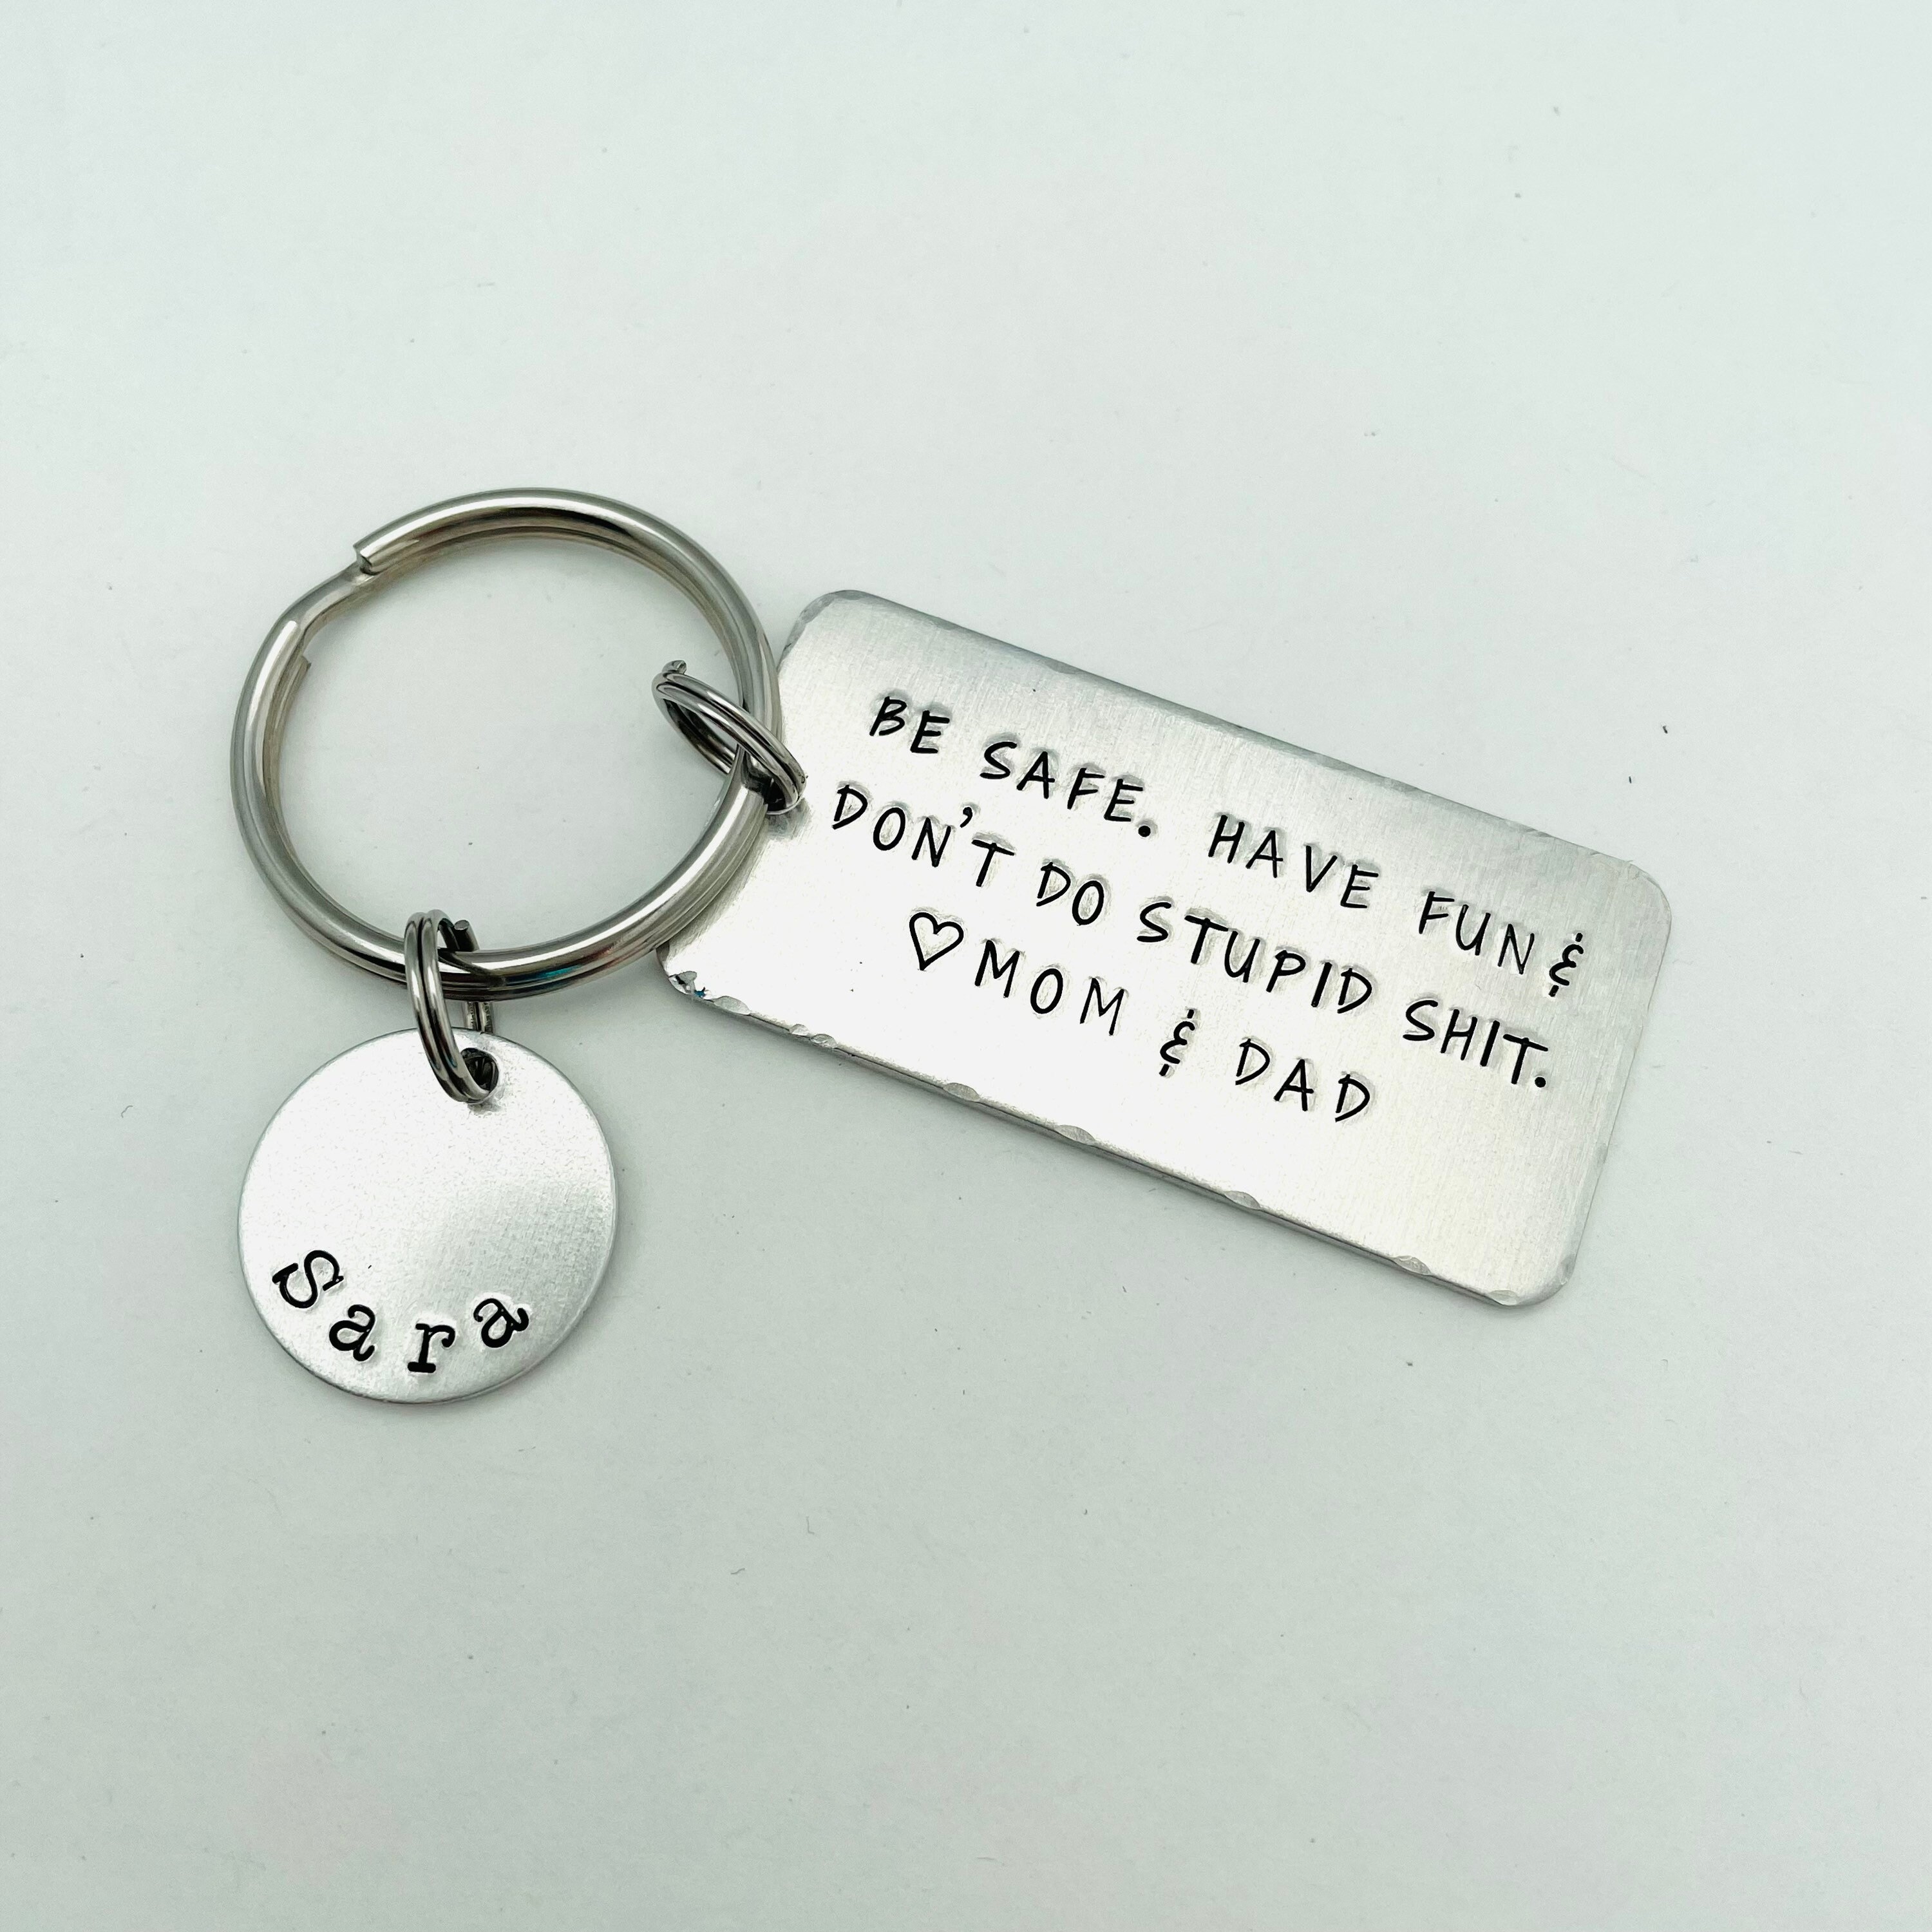 Be Safe, Have Fun, Don't do Stupid Shit. Love Grammy Keyring Gifts